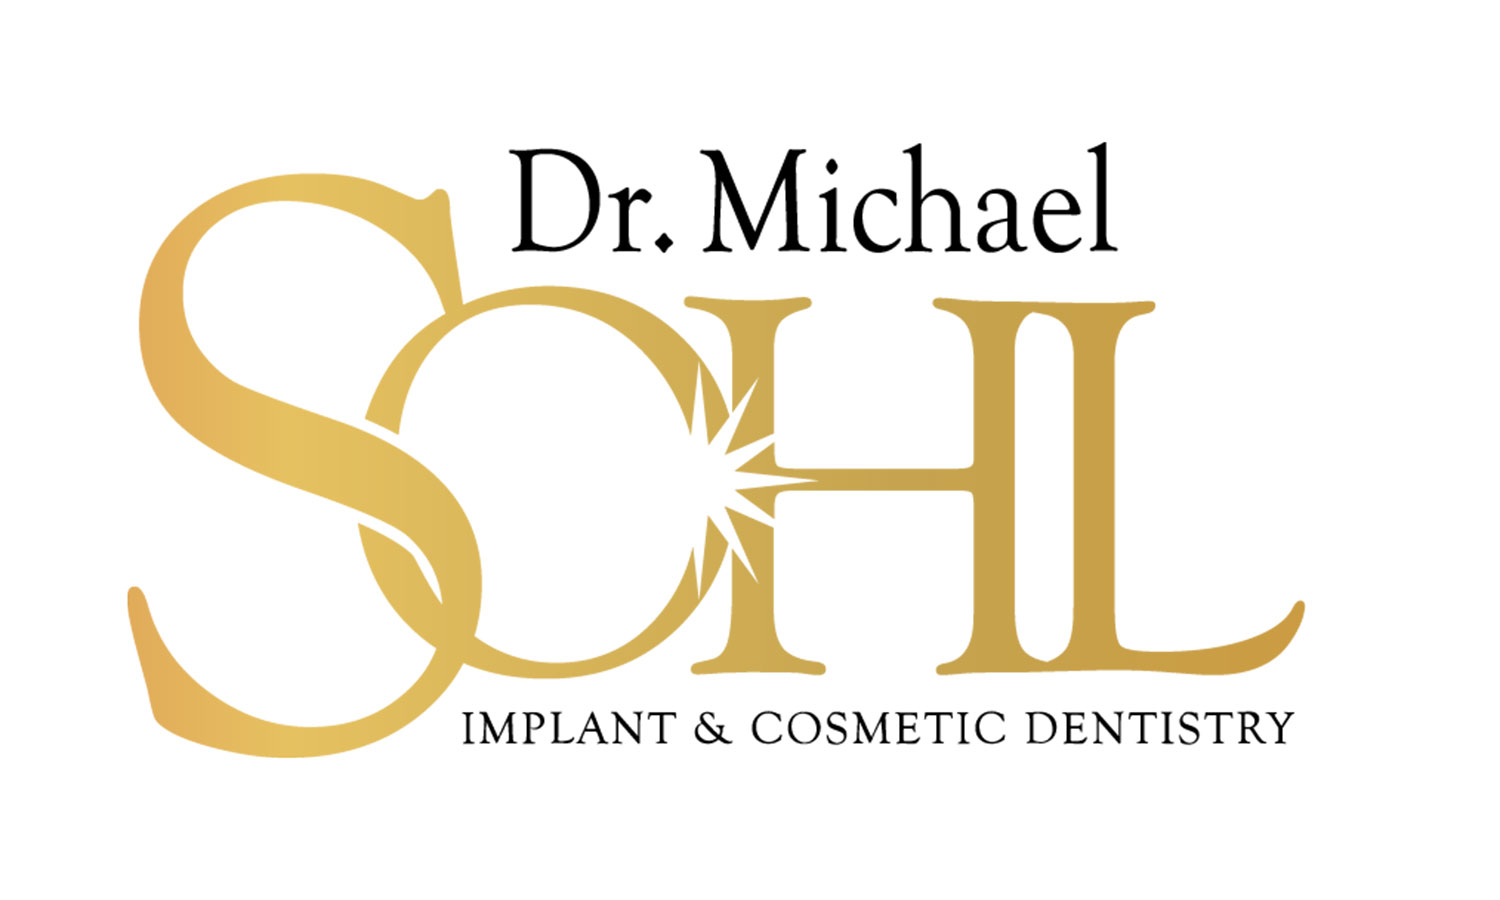 Dr Michael Sohl - Implant & Cosmetic Dentistry Logo